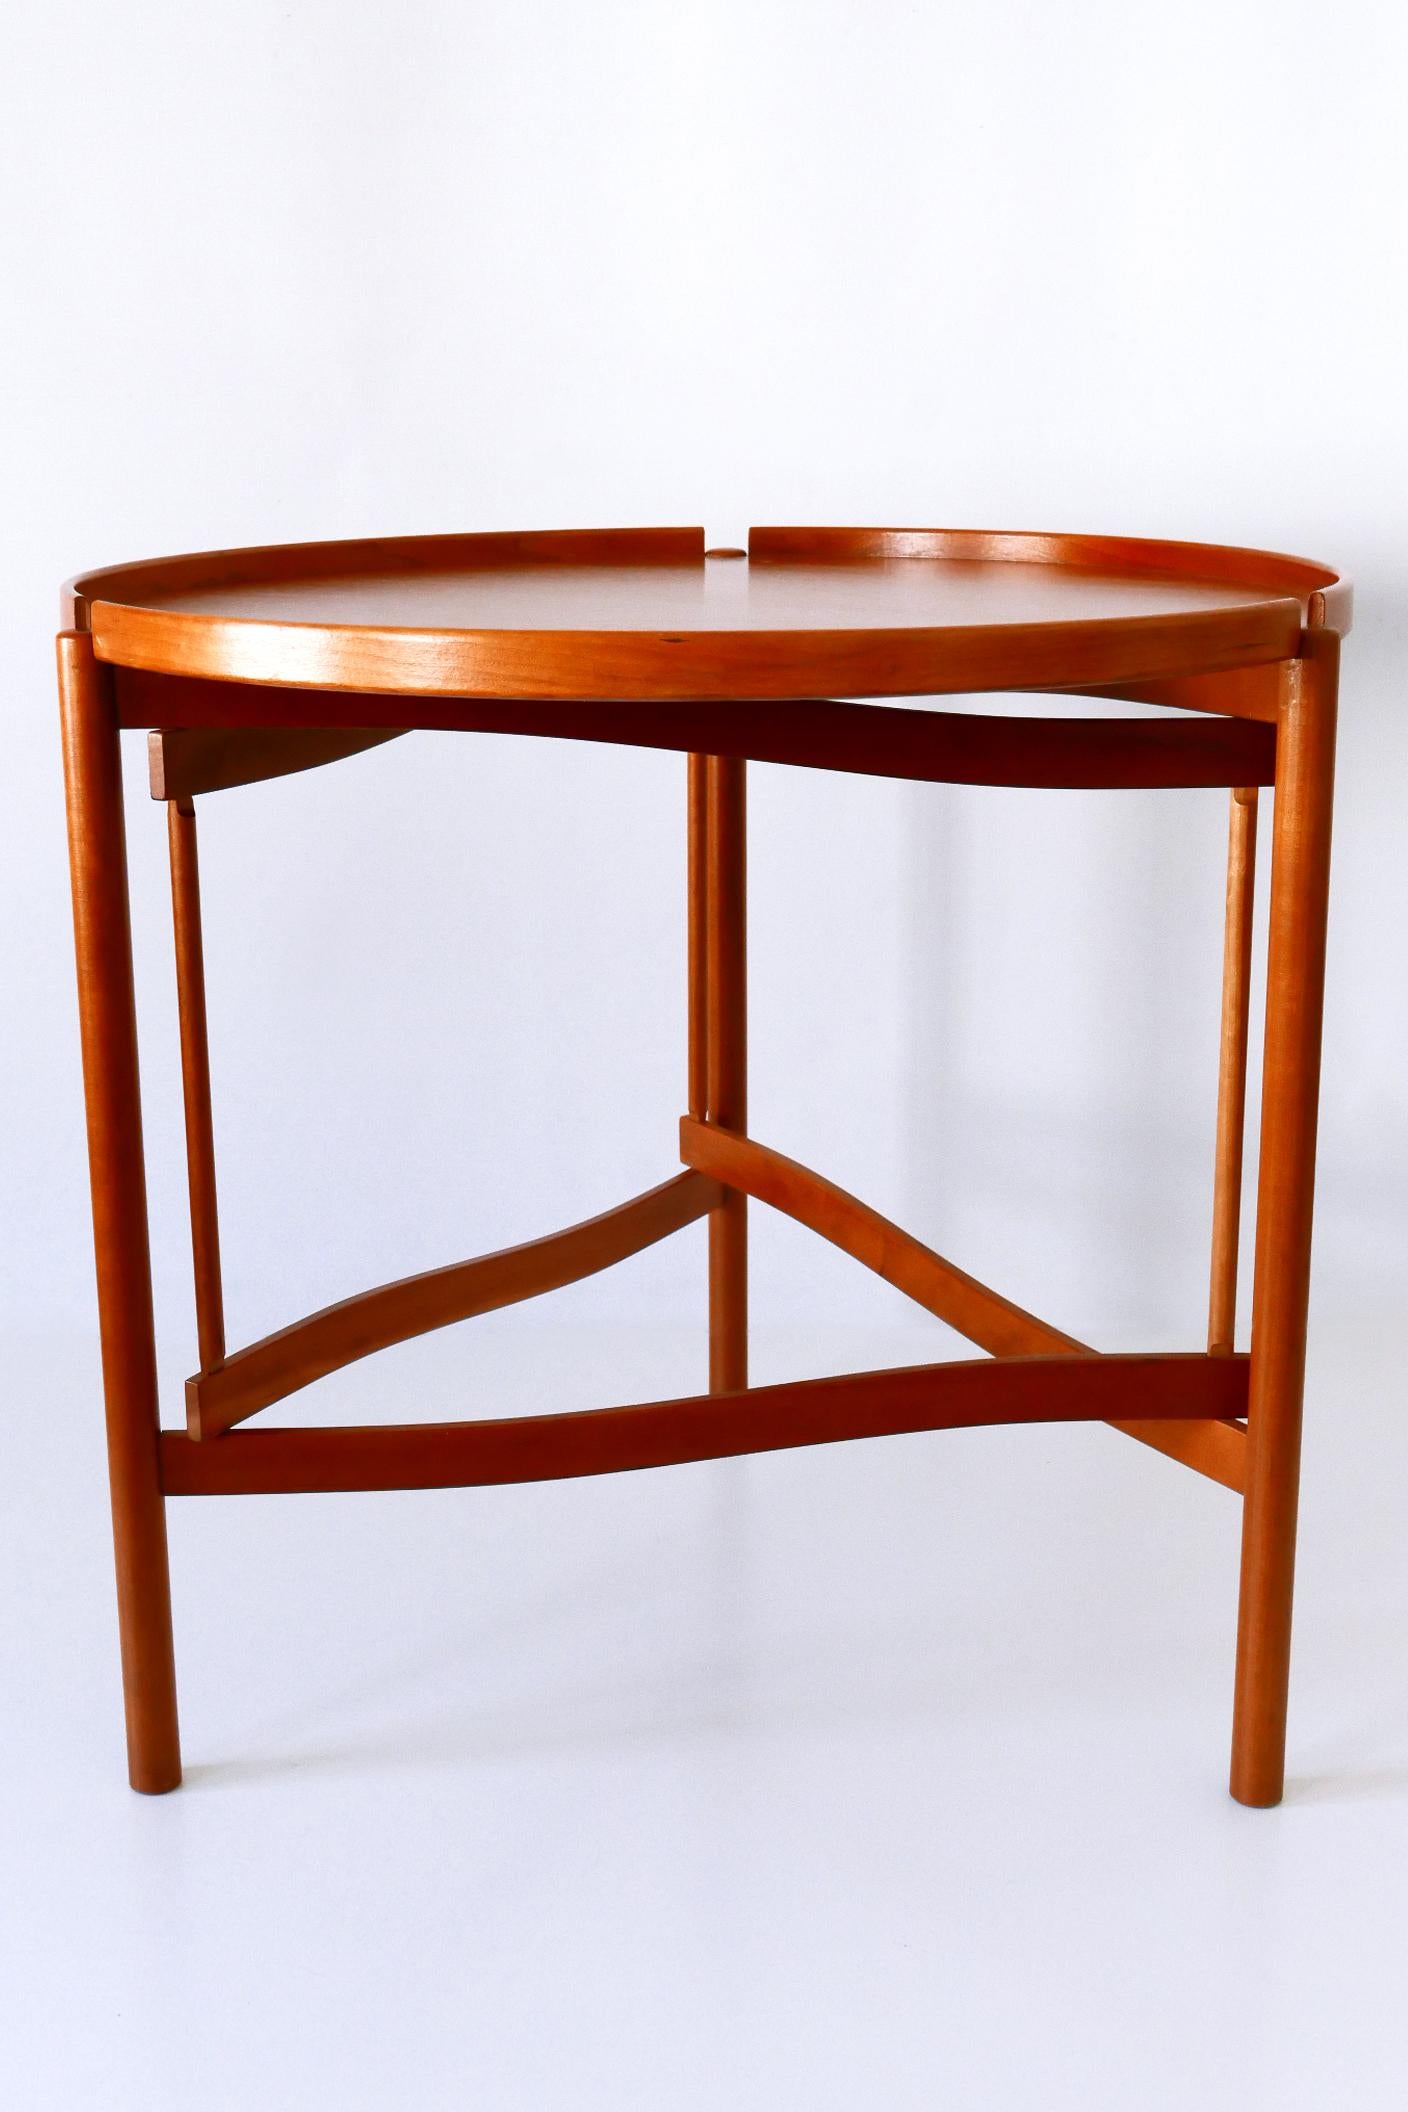 Exceptional Side Table Tema by Hans Johansson for Karl Andersson & Söner Sweden For Sale 2